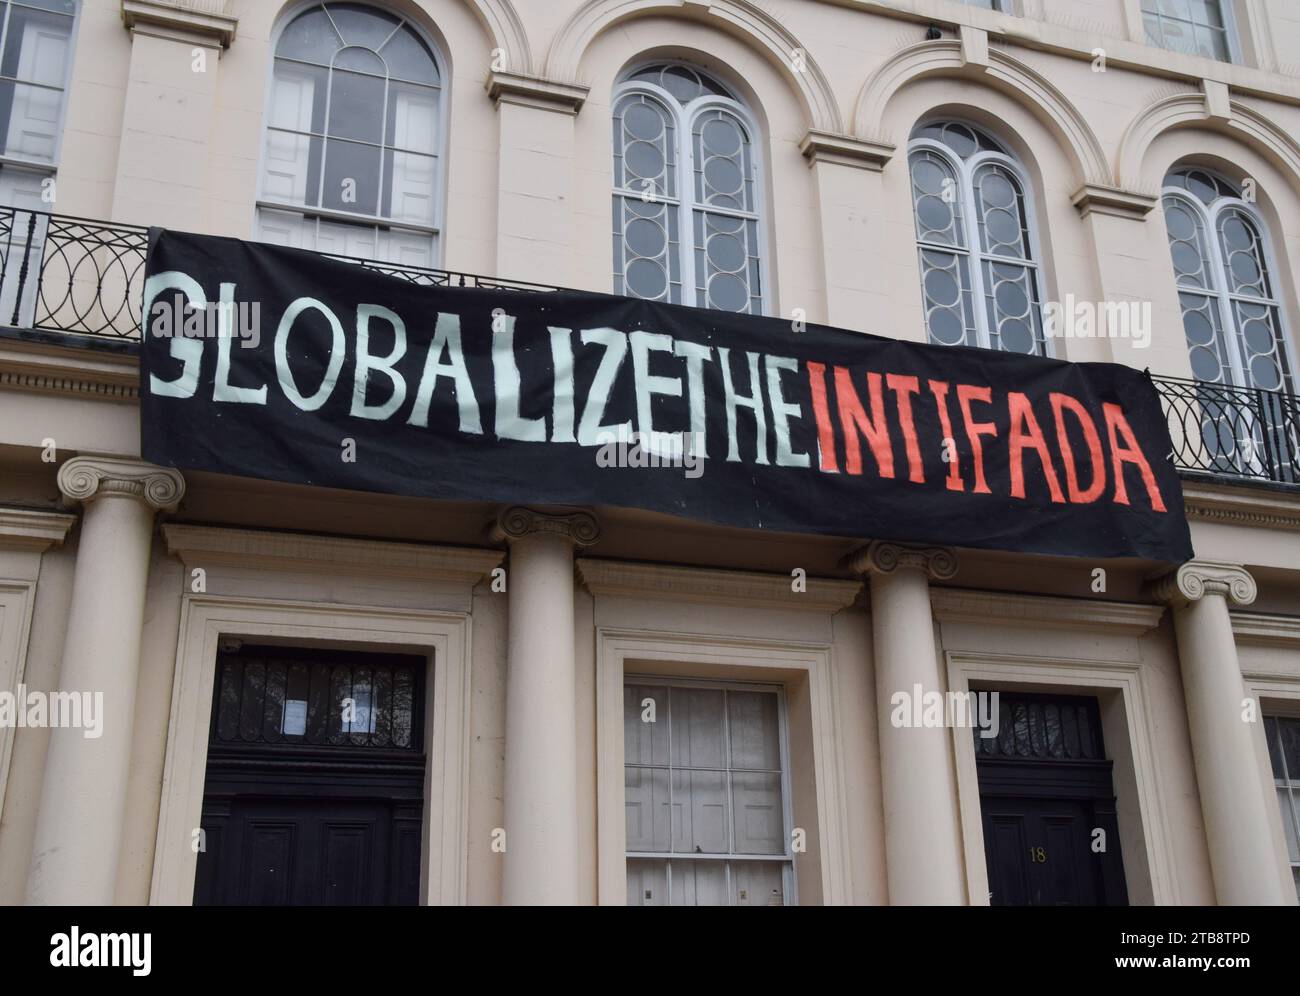 London, UK. 5th December 2023. Pro-Palestine squatters hang a banner stating 'Globalize the Intifada' outside the Diorama building next to Regent’s Park. Credit: Vuk Valcic/Alamy Live News Stock Photo